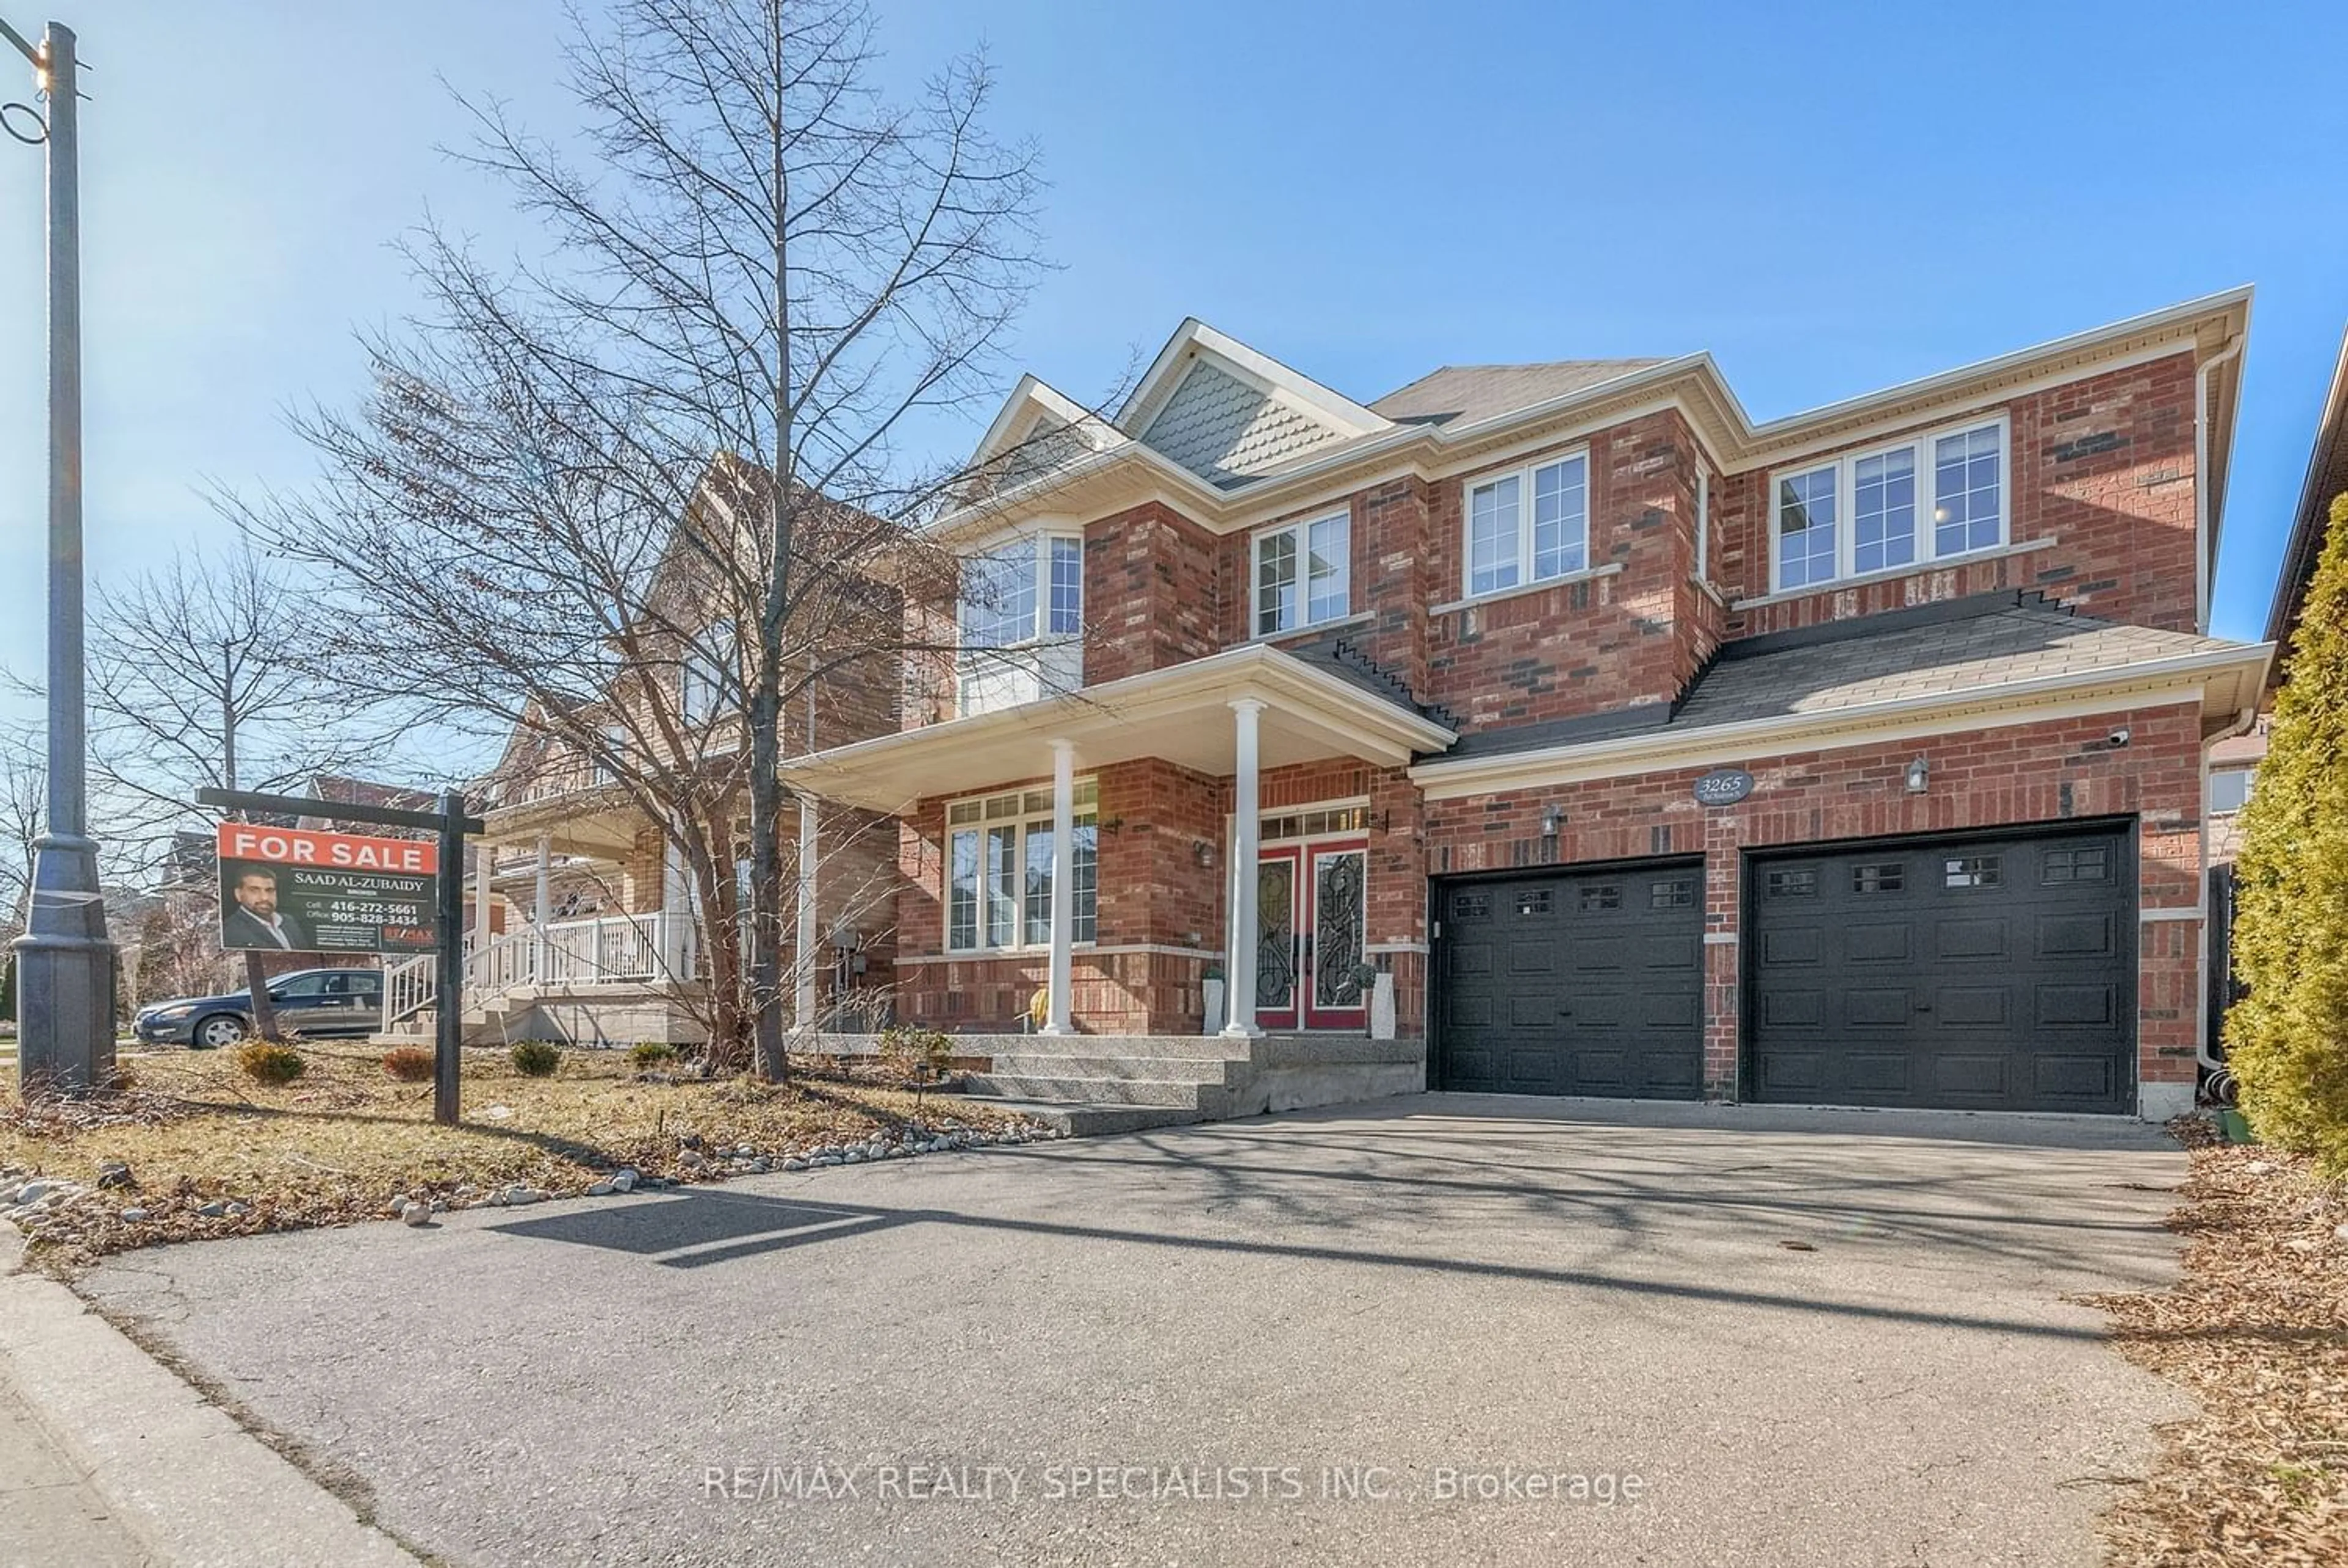 Home with brick exterior material for 3265 Paul Henderson Dr, Mississauga Ontario L5M 0H5